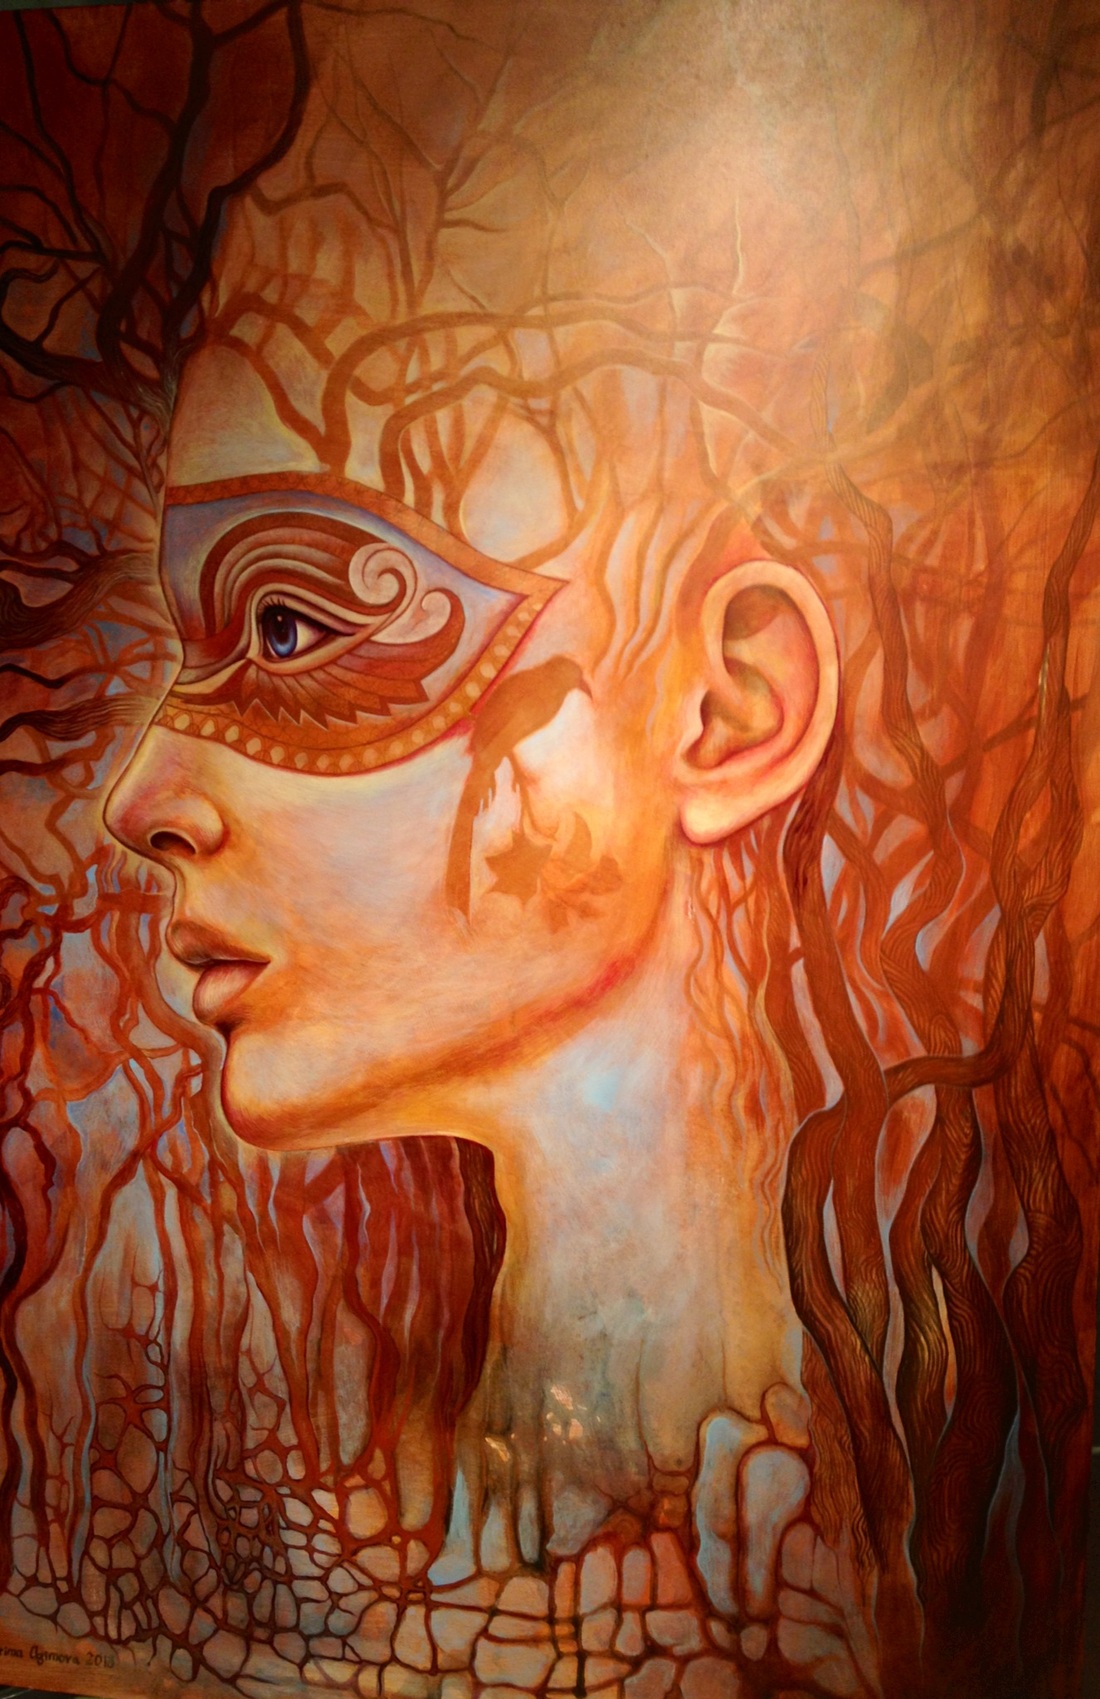 FEATURED ARTWORK - VISIONARY ART EXHIBITION